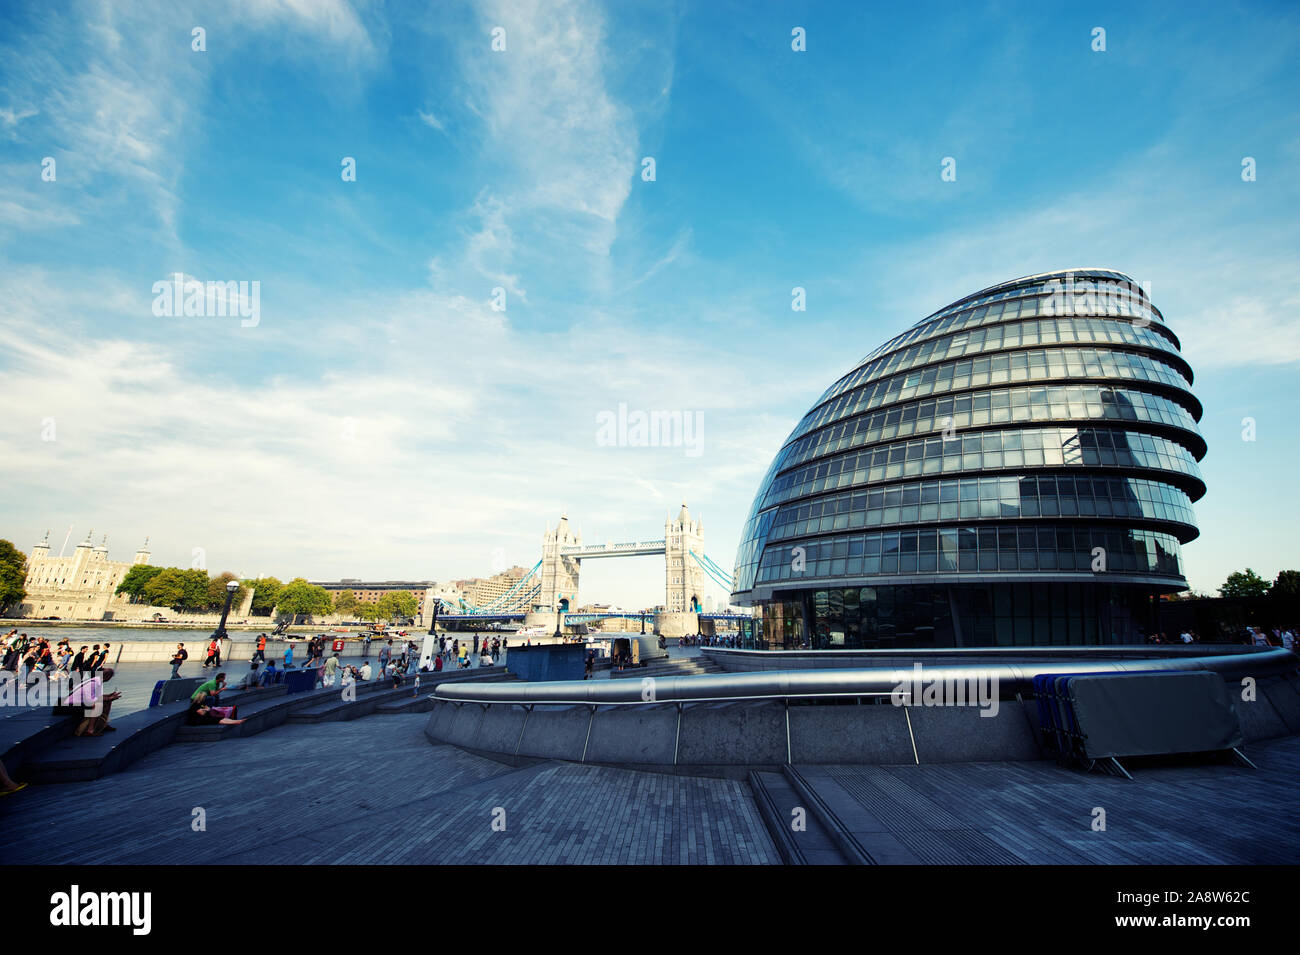 LONDON - OCTOBER 1, 2011: People walk along the Thames path in front of City Hall, the 10-story building designed by architect Sir Norman Foster. Stock Photo